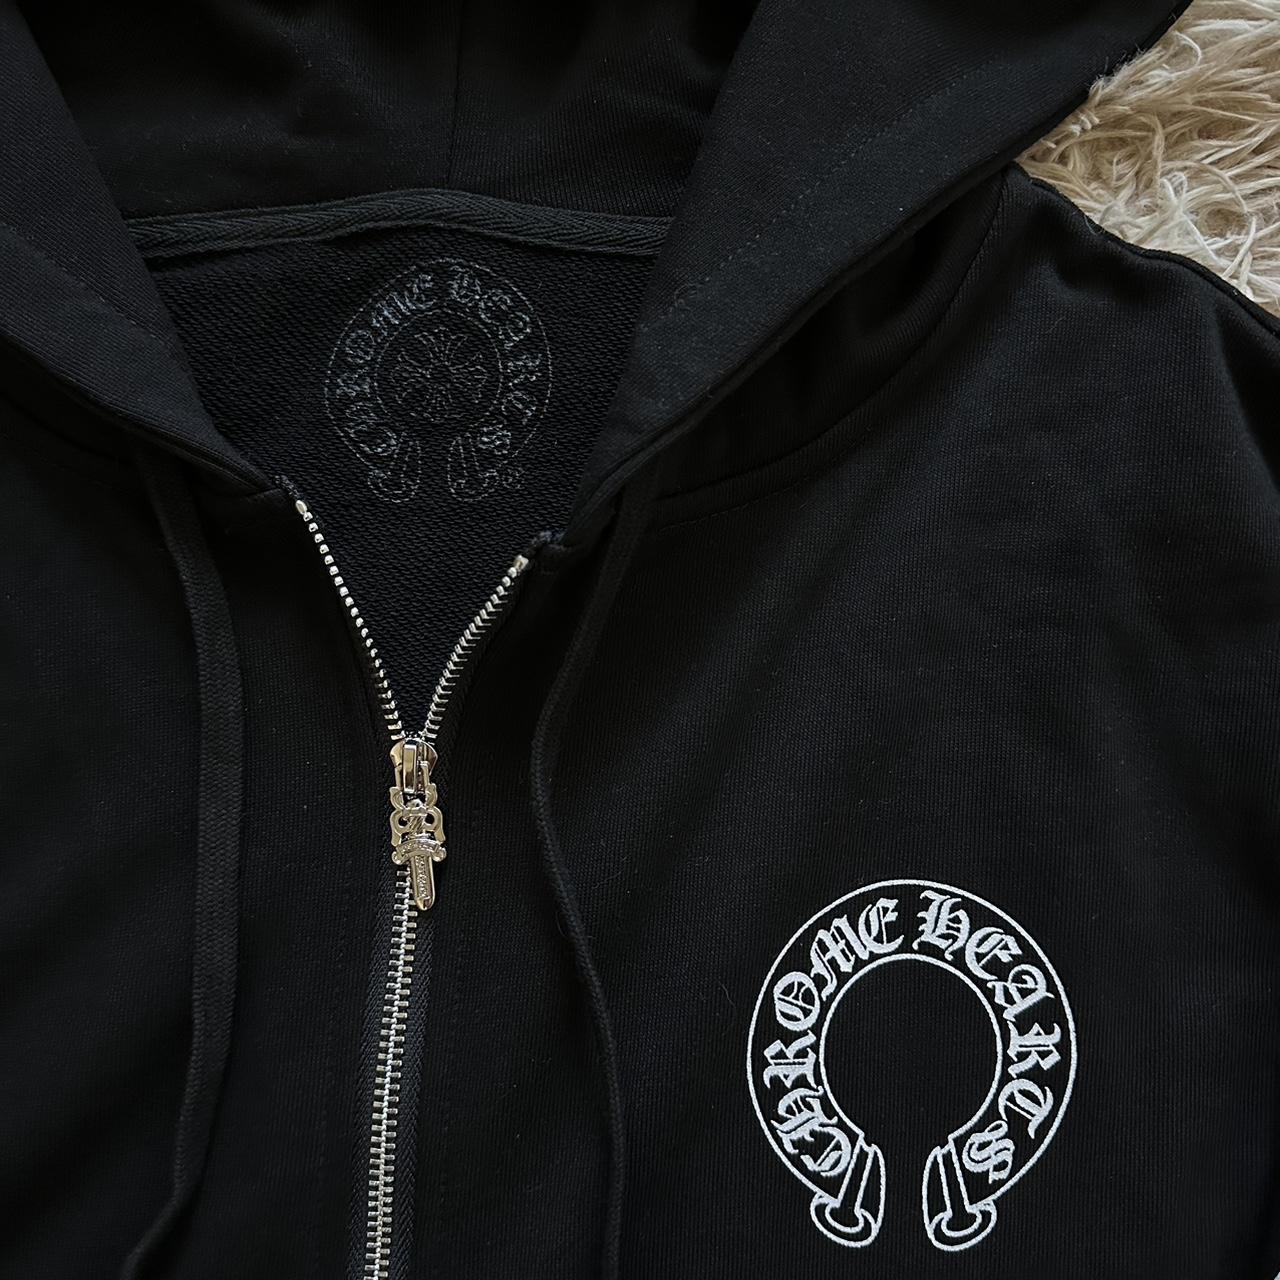 Chrome Hearts Zip Up Hoodie Size M Width 21